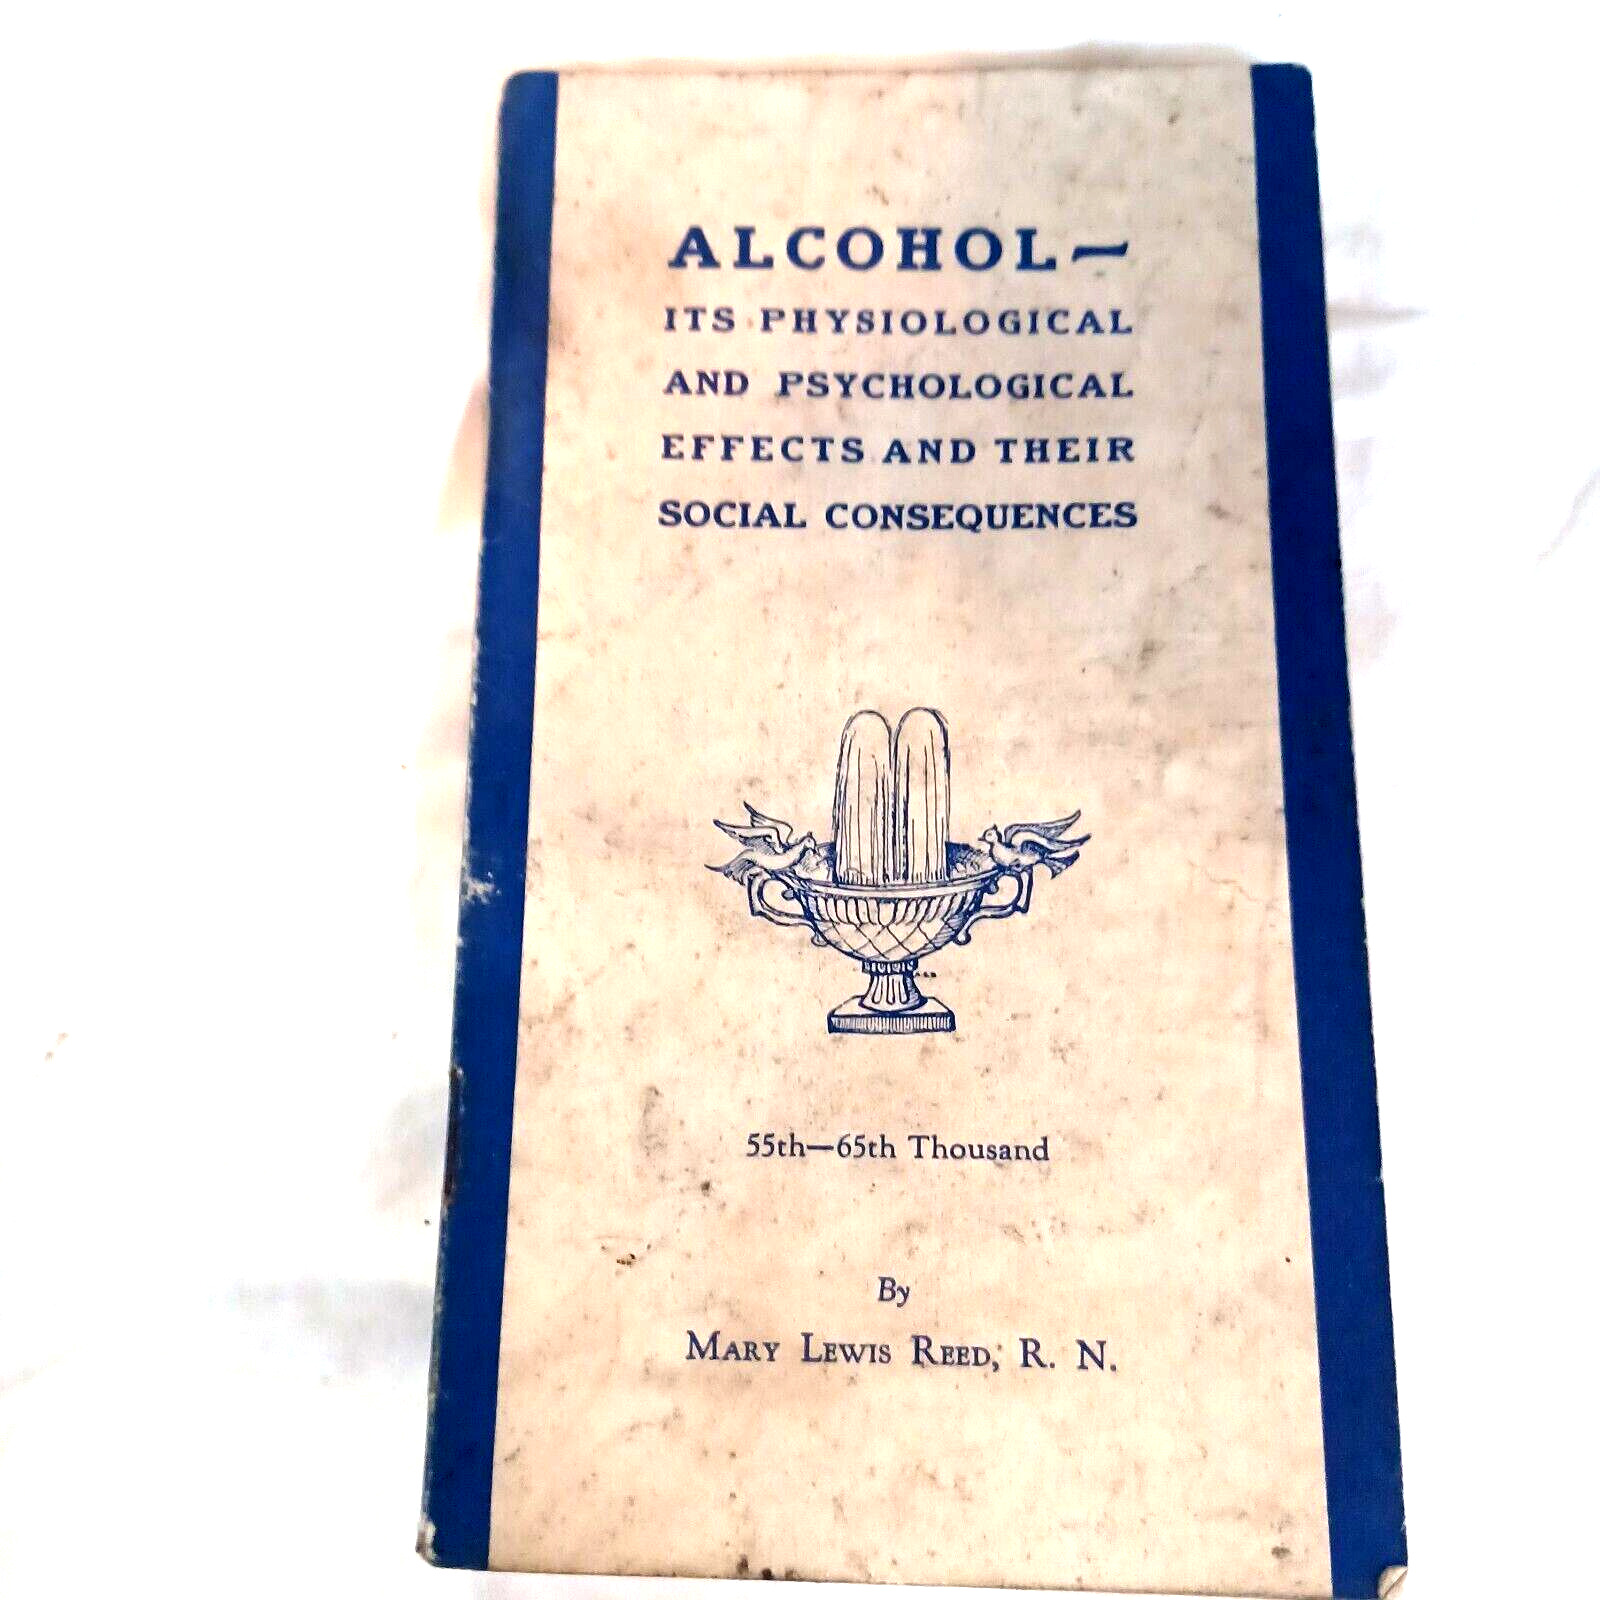 AA WWII ALCOHOLIC BOOK Physiological EFFECTS Mary LEWIS Reed RN Consequences